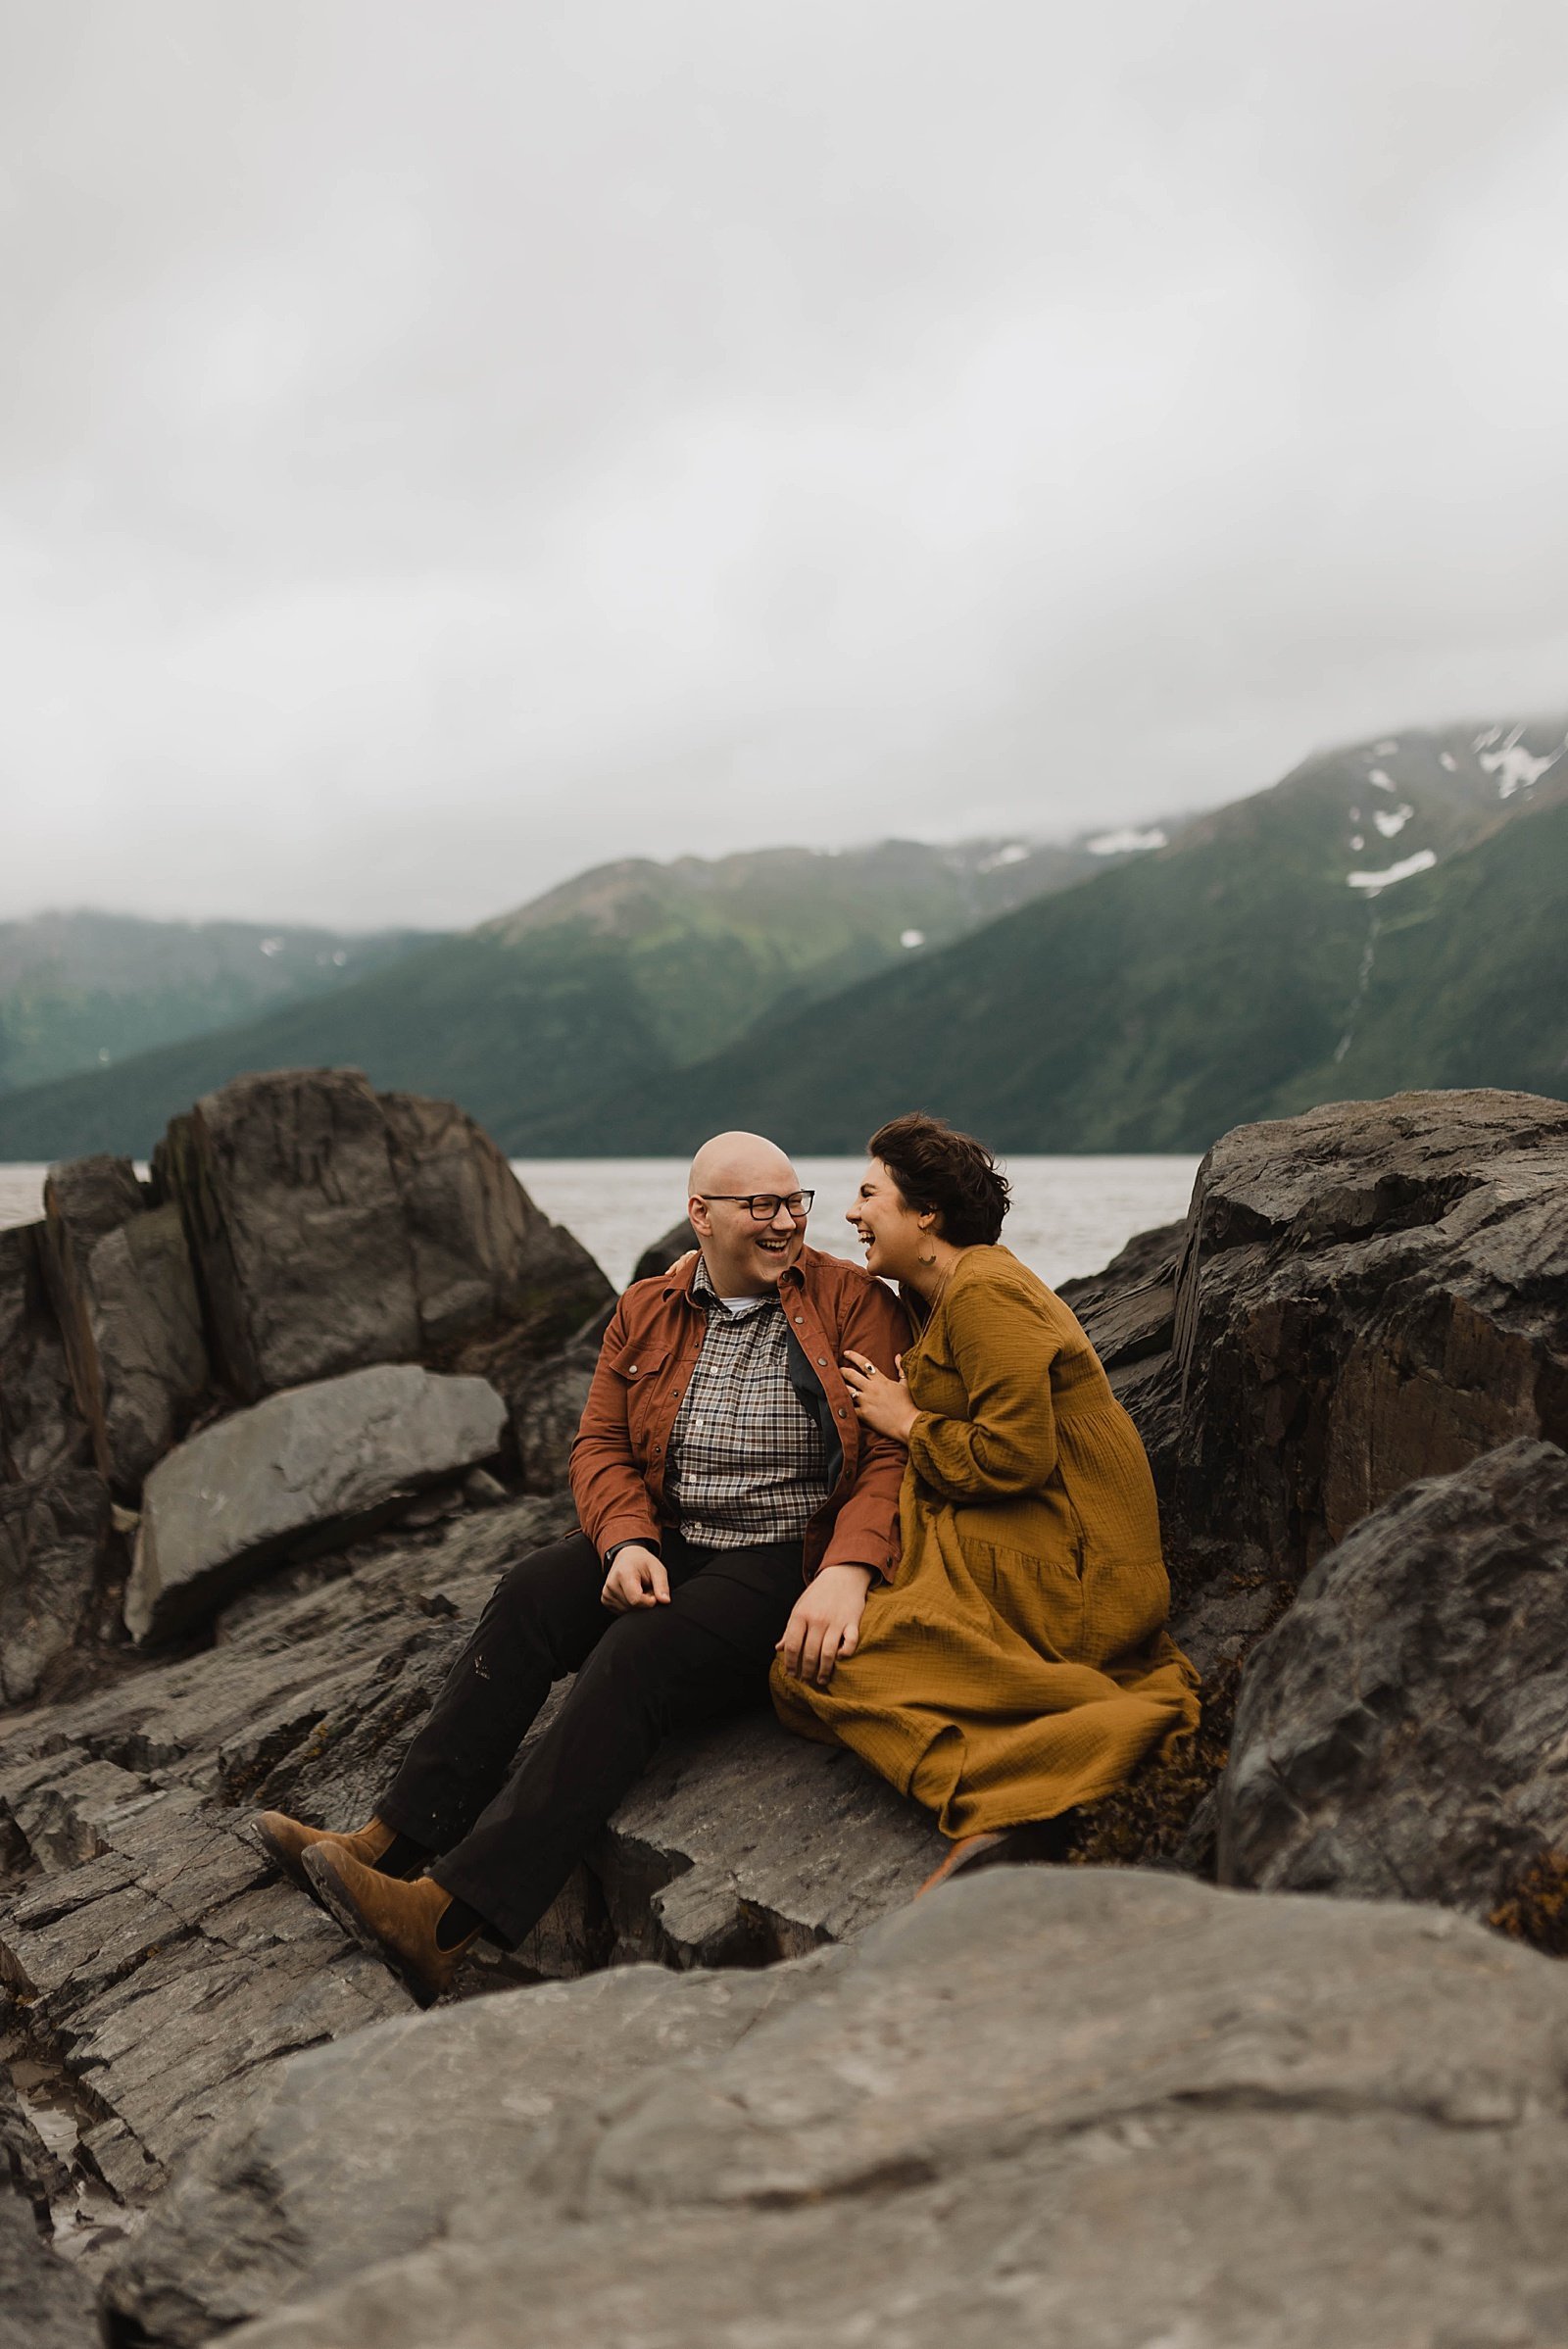  Man and woman sitting on a rock together with mountains in the background for their romantic anniversary session. 